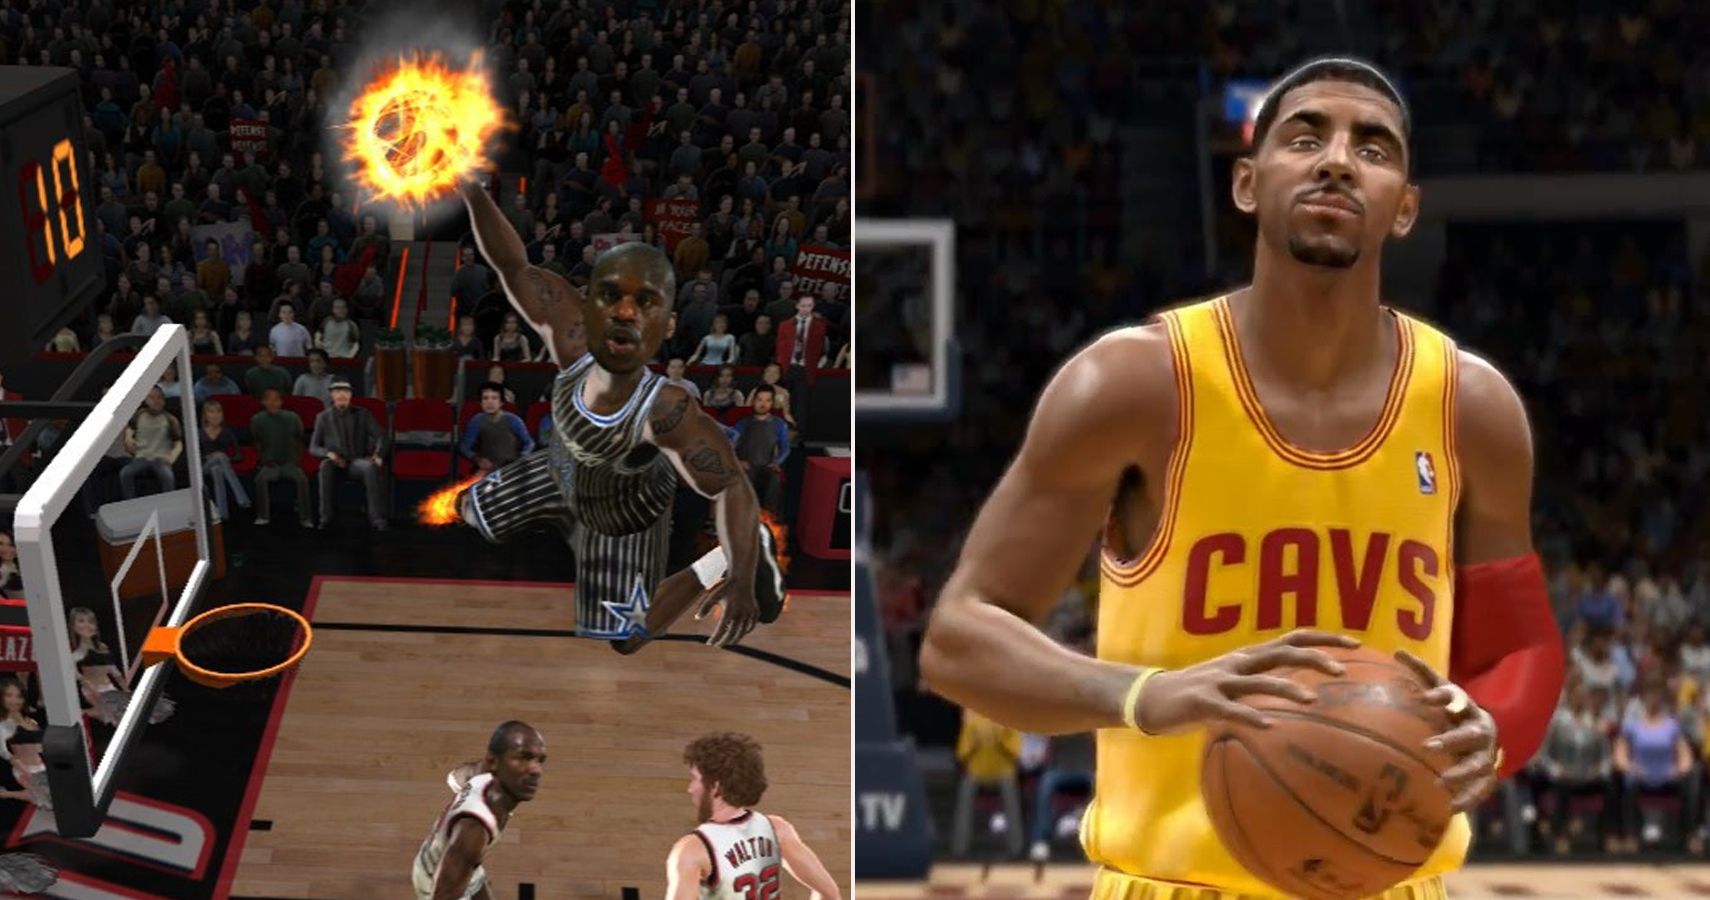 The Best and Worst Basketball Games